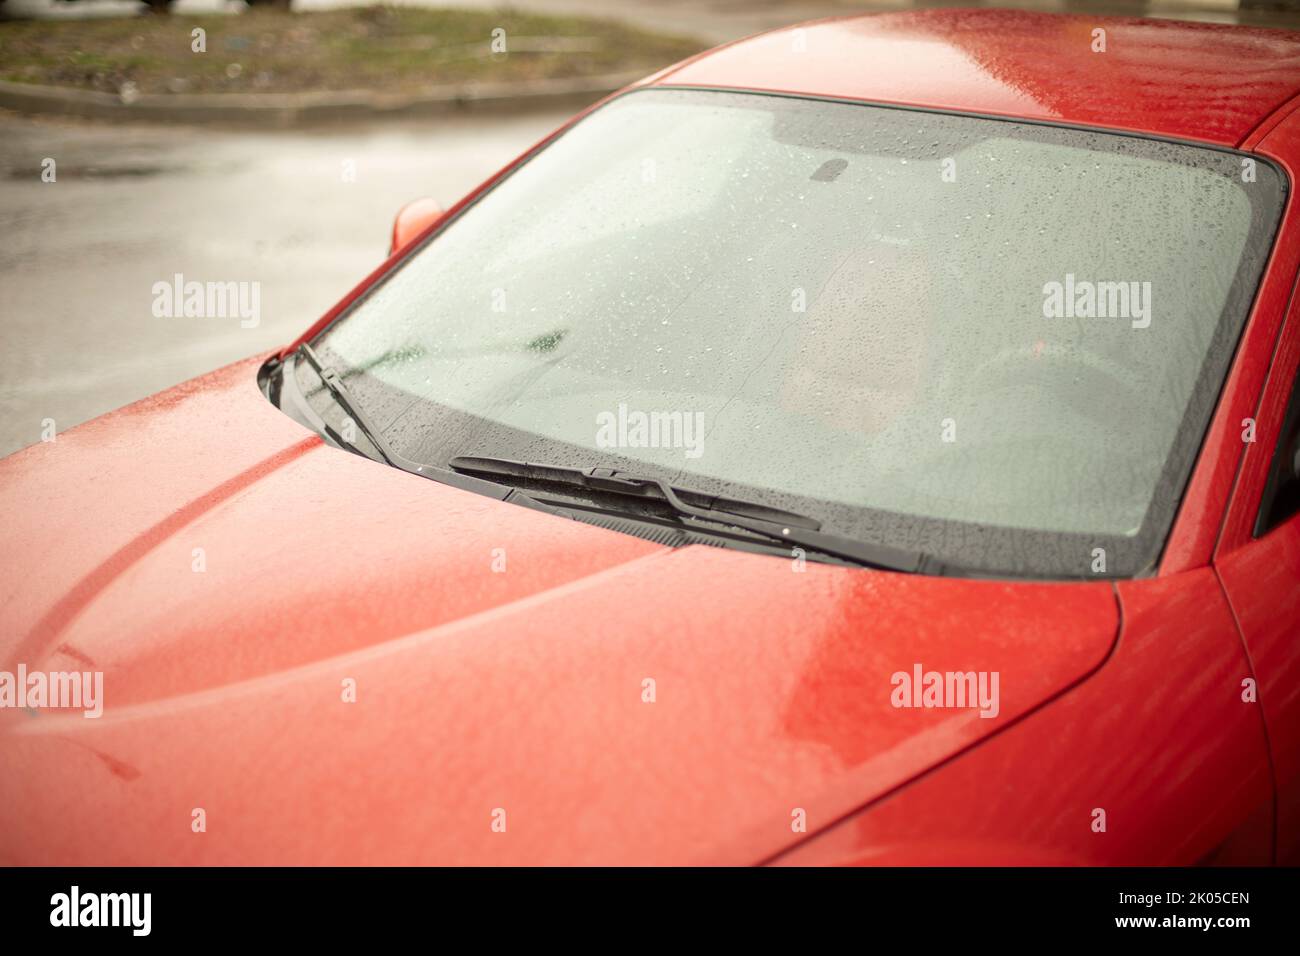 Red car. Wet car in parking lot. Windshield of transport. Stock Photo